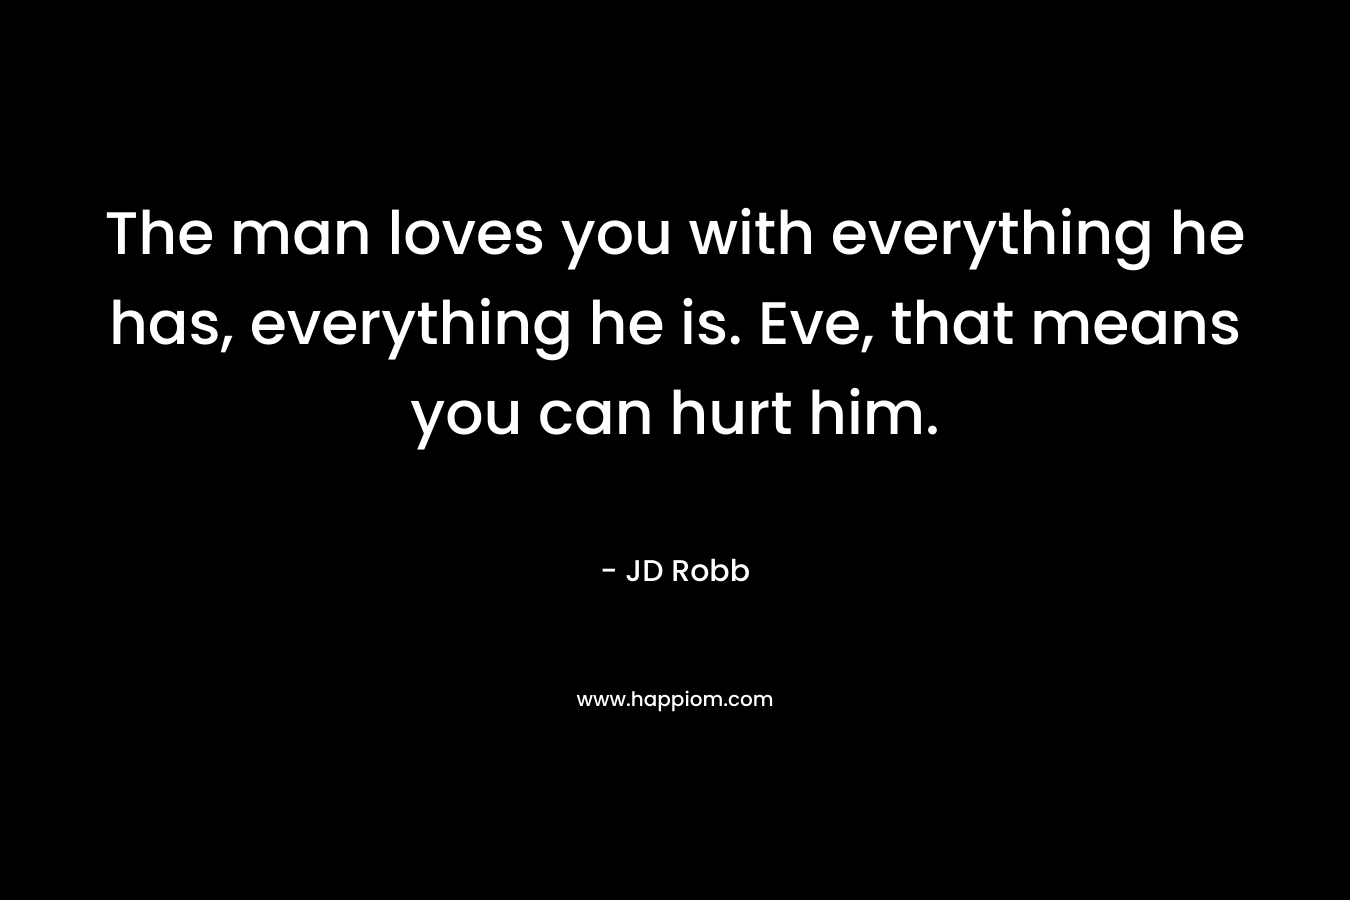 The man loves you with everything he has, everything he is. Eve, that means you can hurt him. – JD Robb